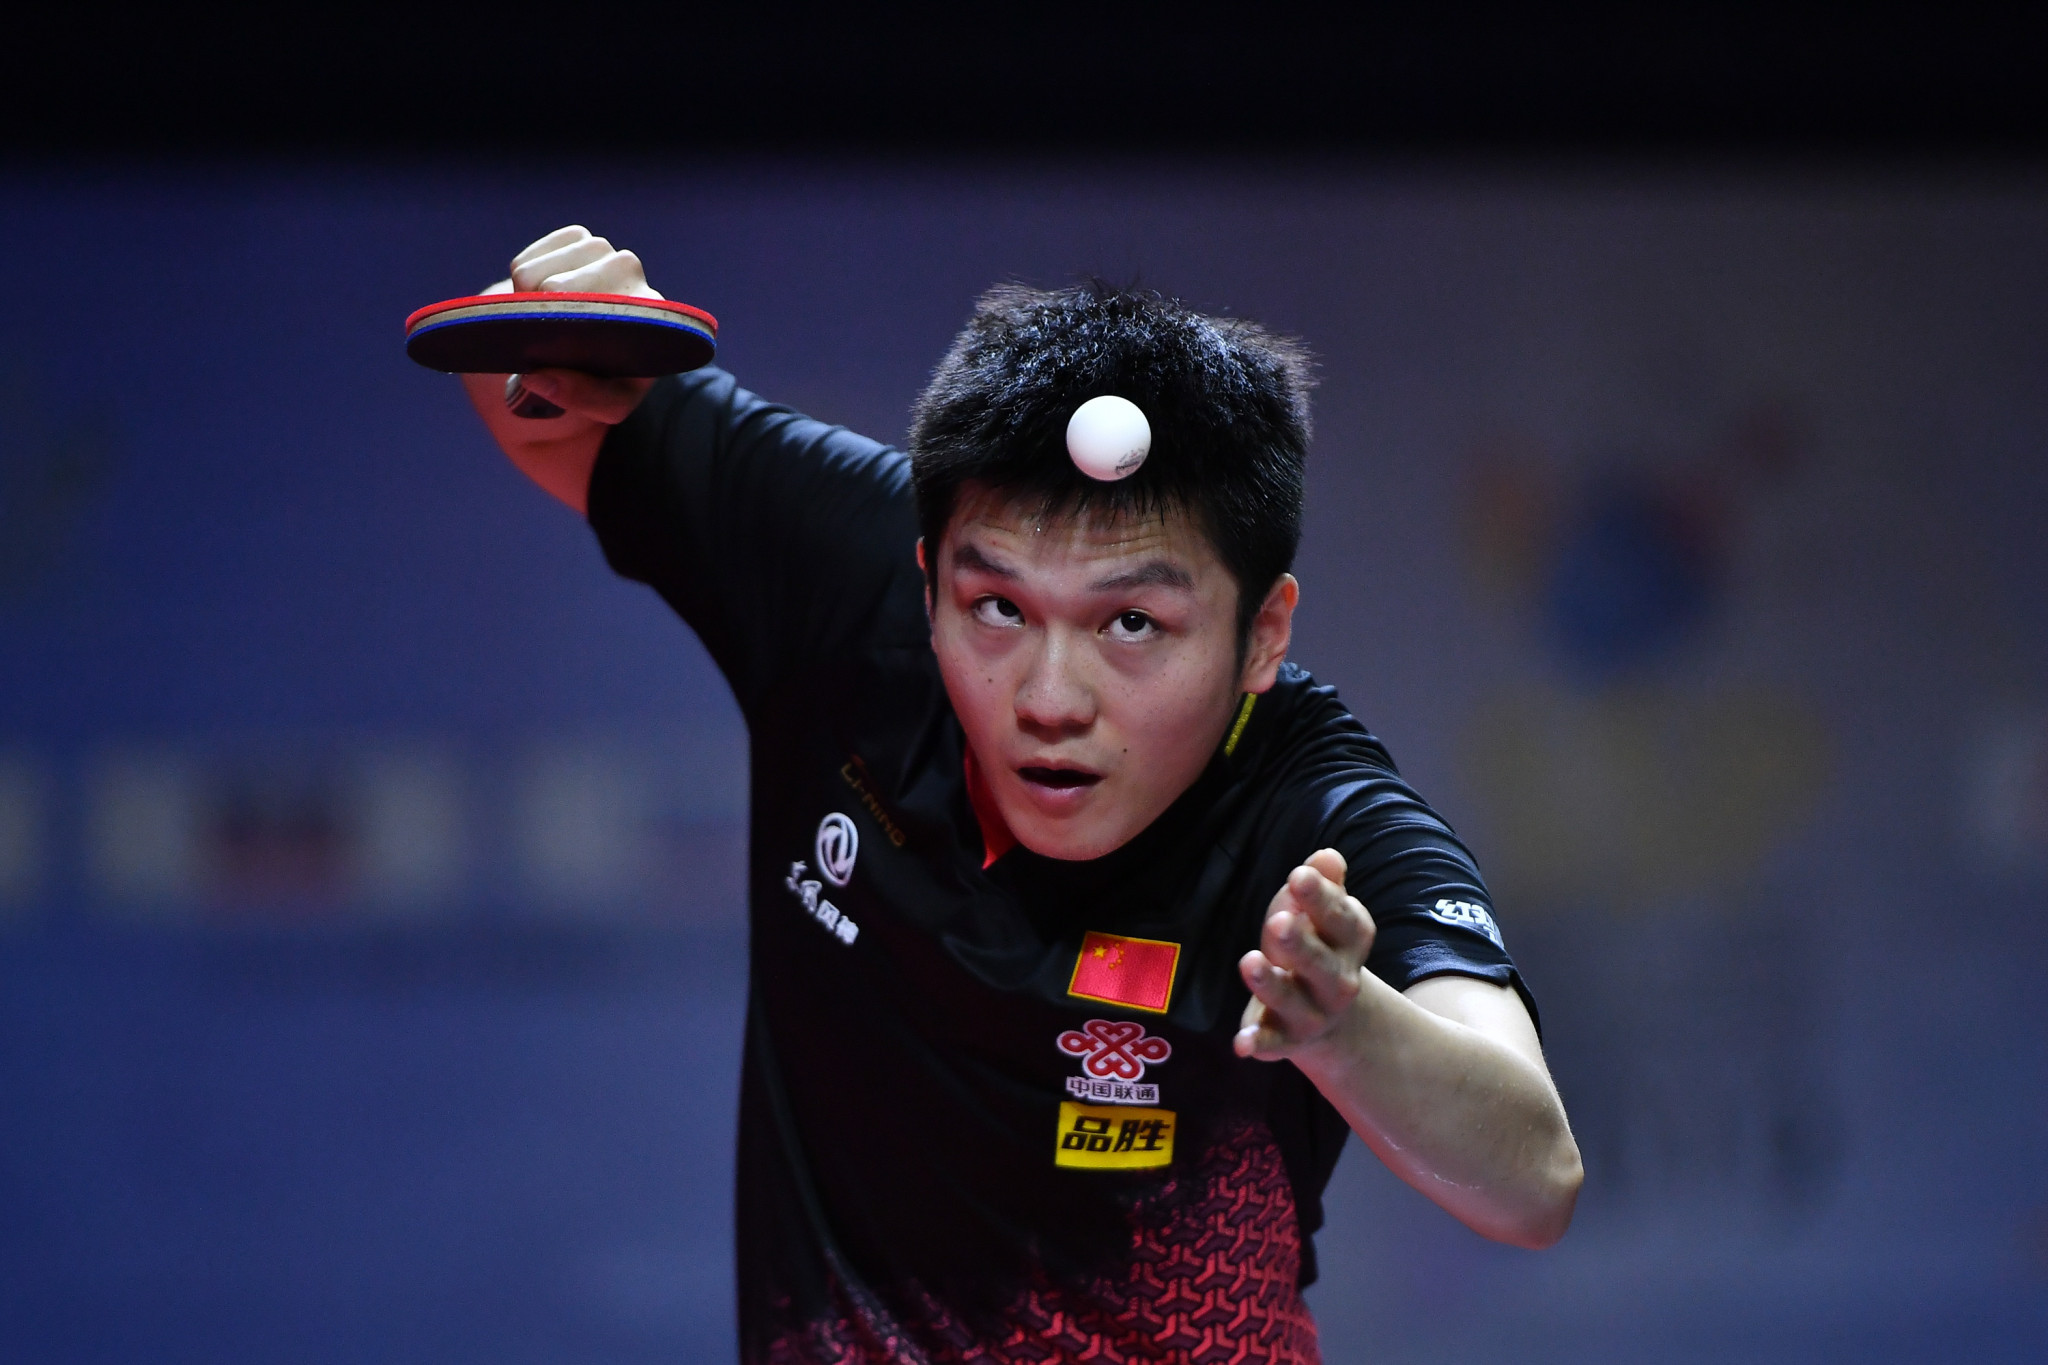 Fan Zhendong will lead the Chinese men's team as they bid to defend their title ©Getty Images